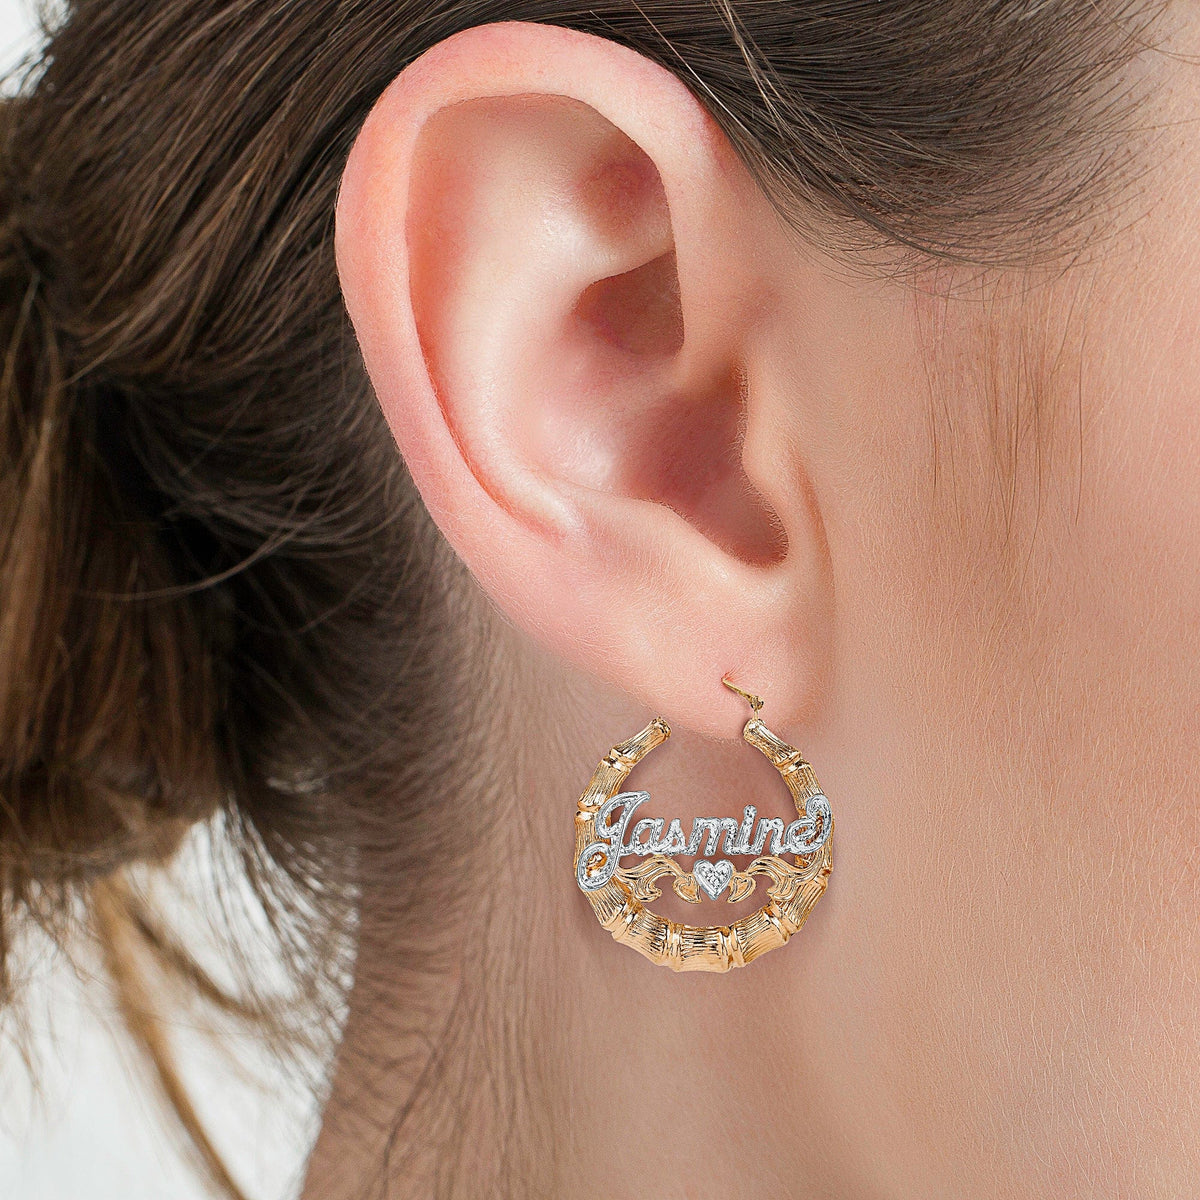 Copy of Script Name Earrings with Beading/Rhodium